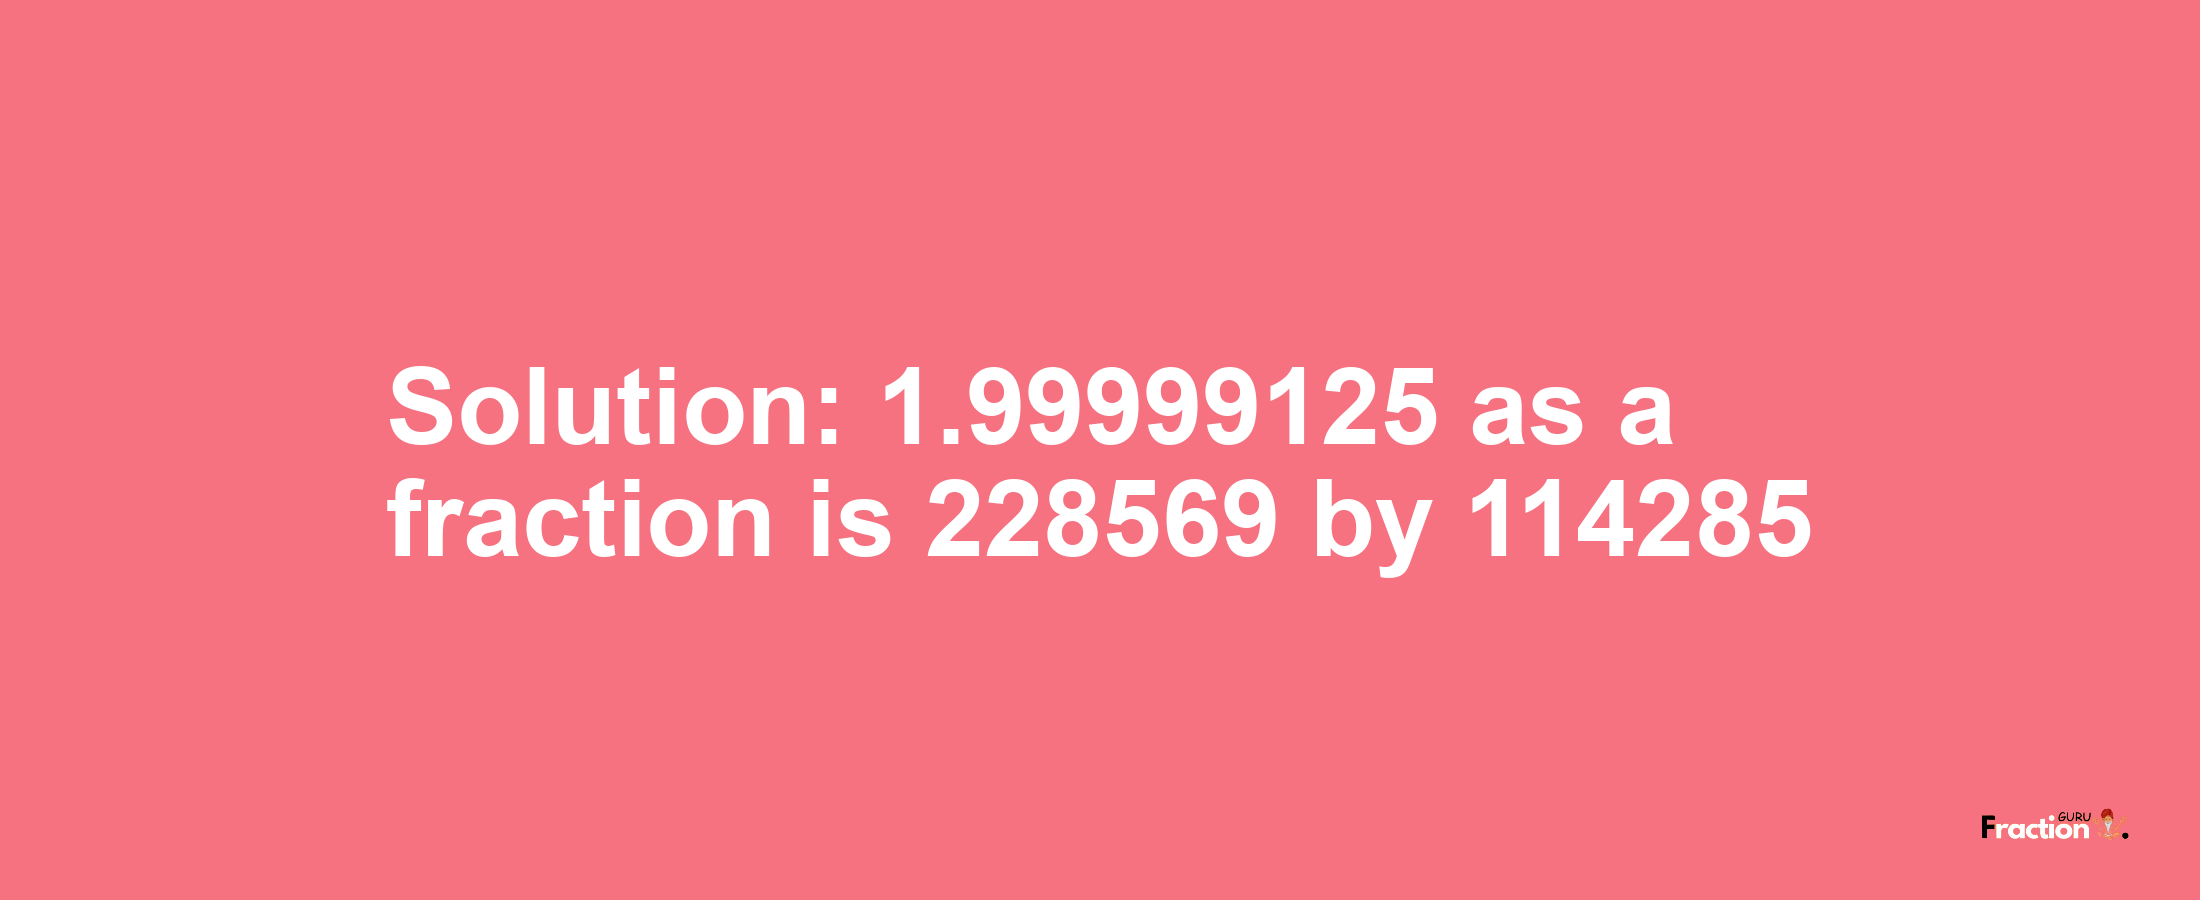 Solution:1.99999125 as a fraction is 228569/114285